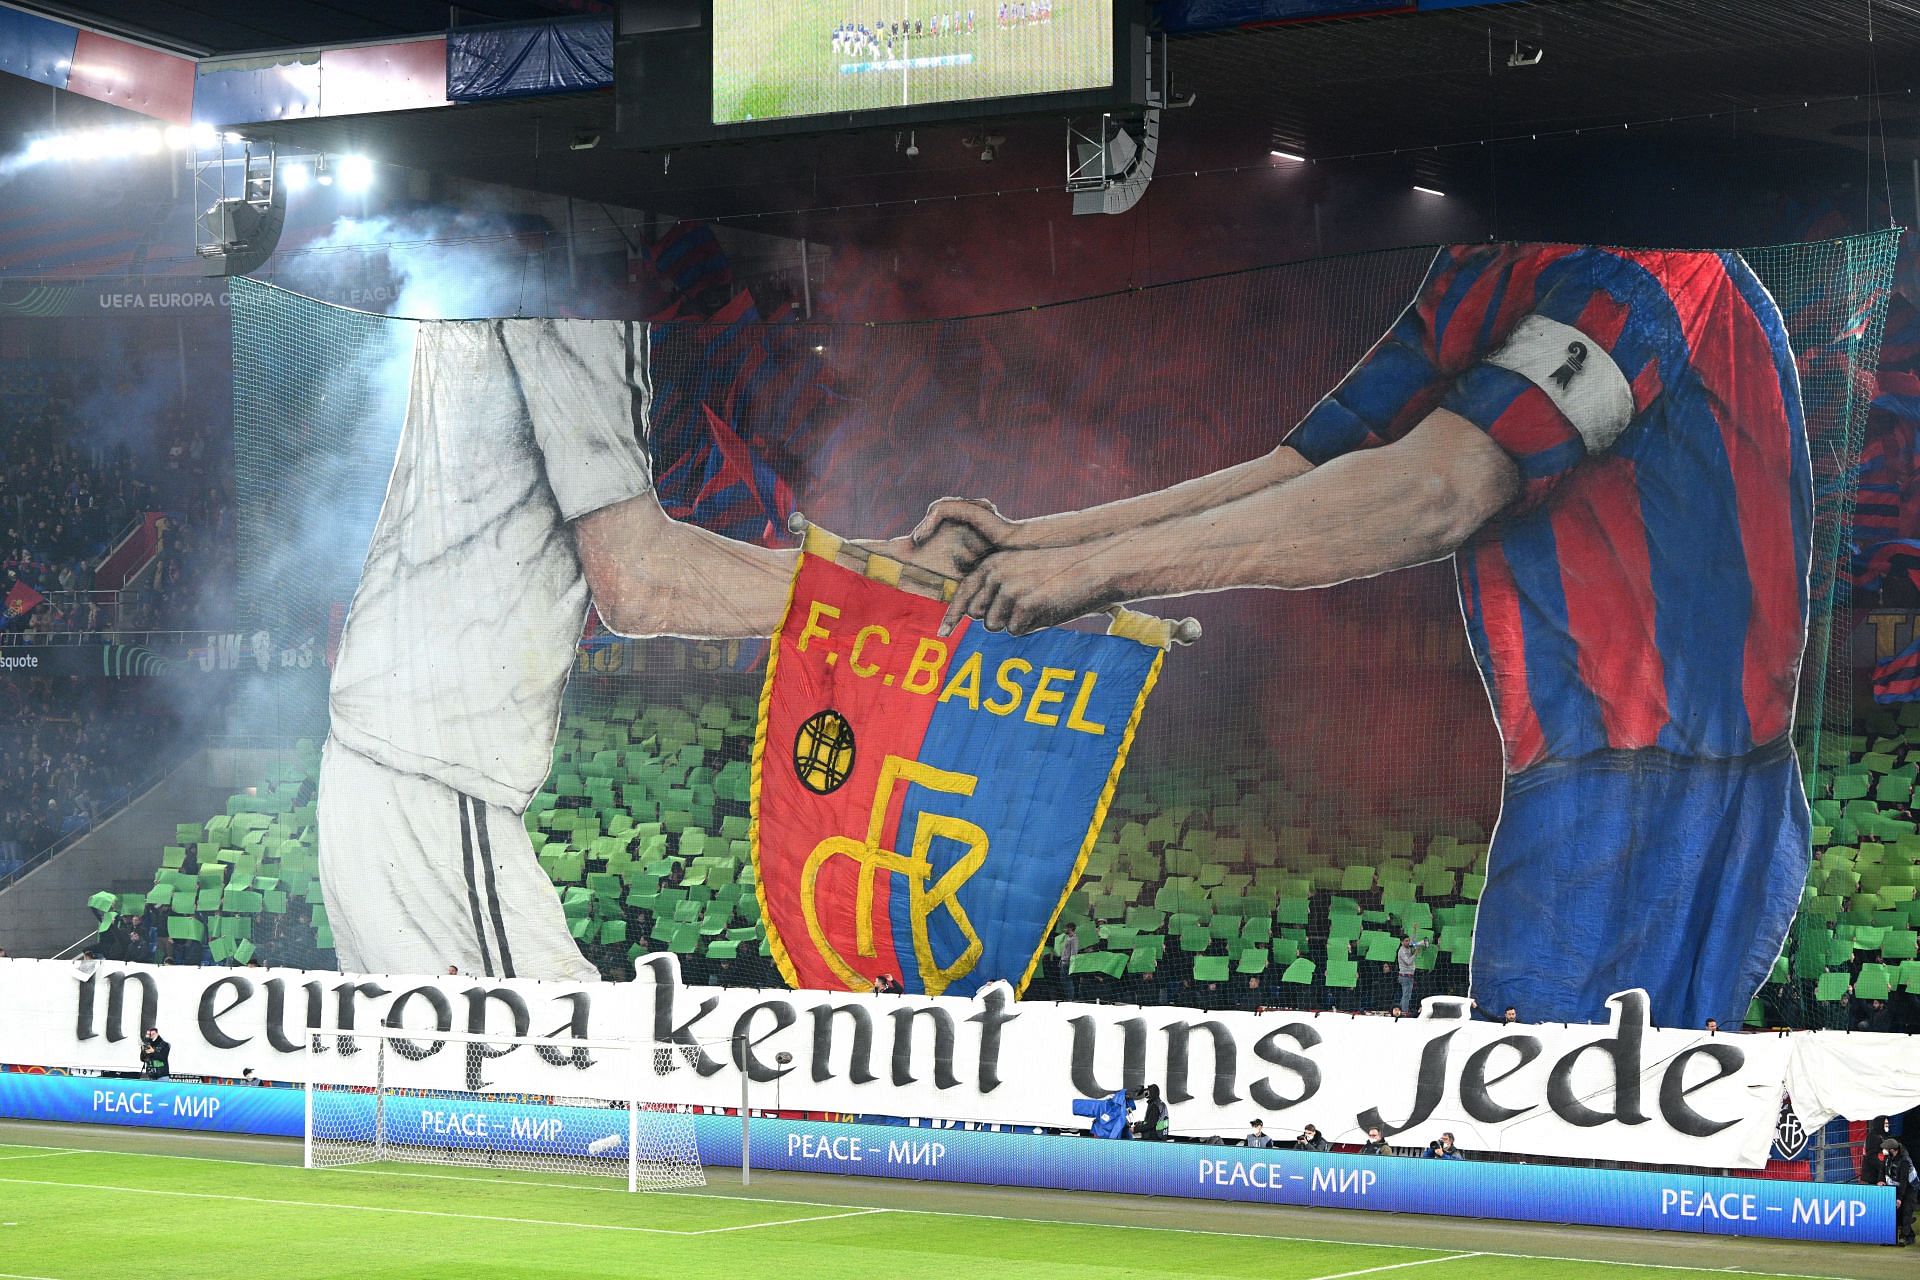 FC Basel continue their pre-season formalities with a friendly game against Furth on Saturday